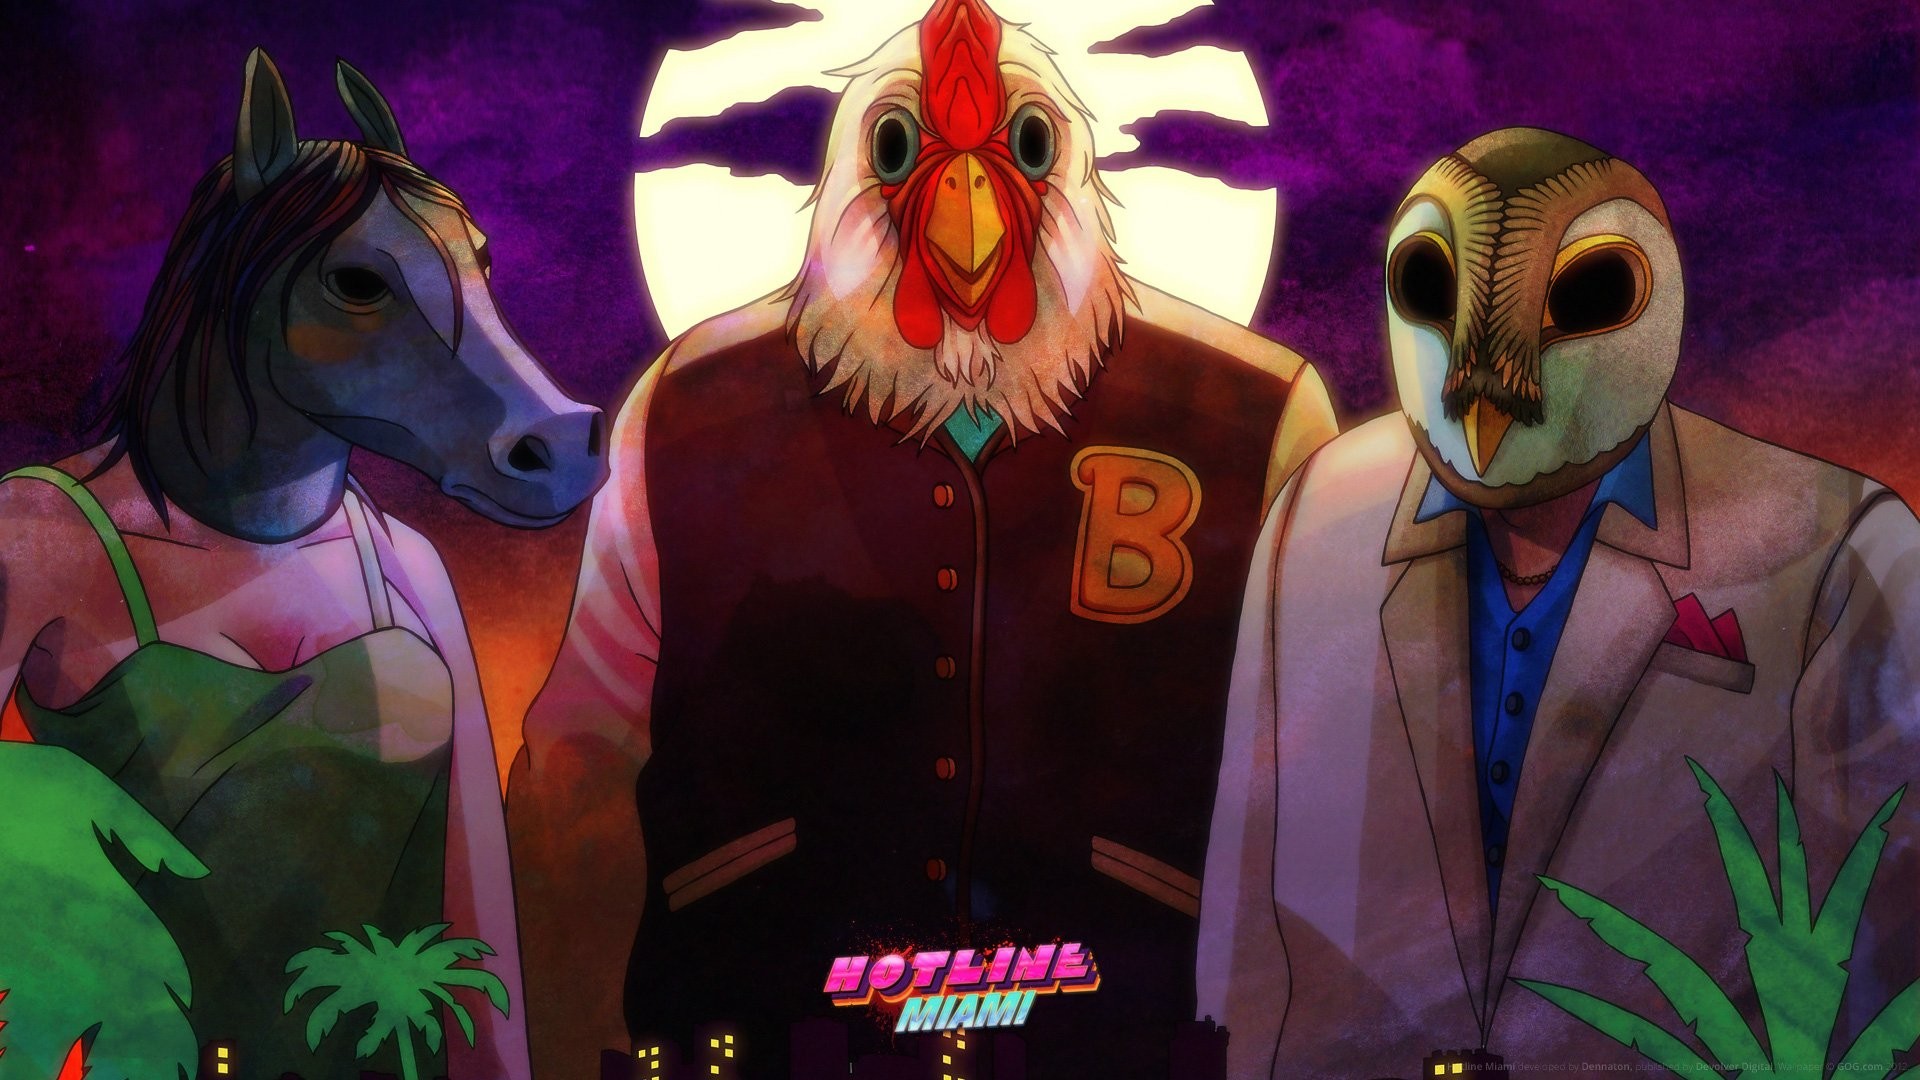 General 1920x1080 Hotline Miami video games video game art PC gaming